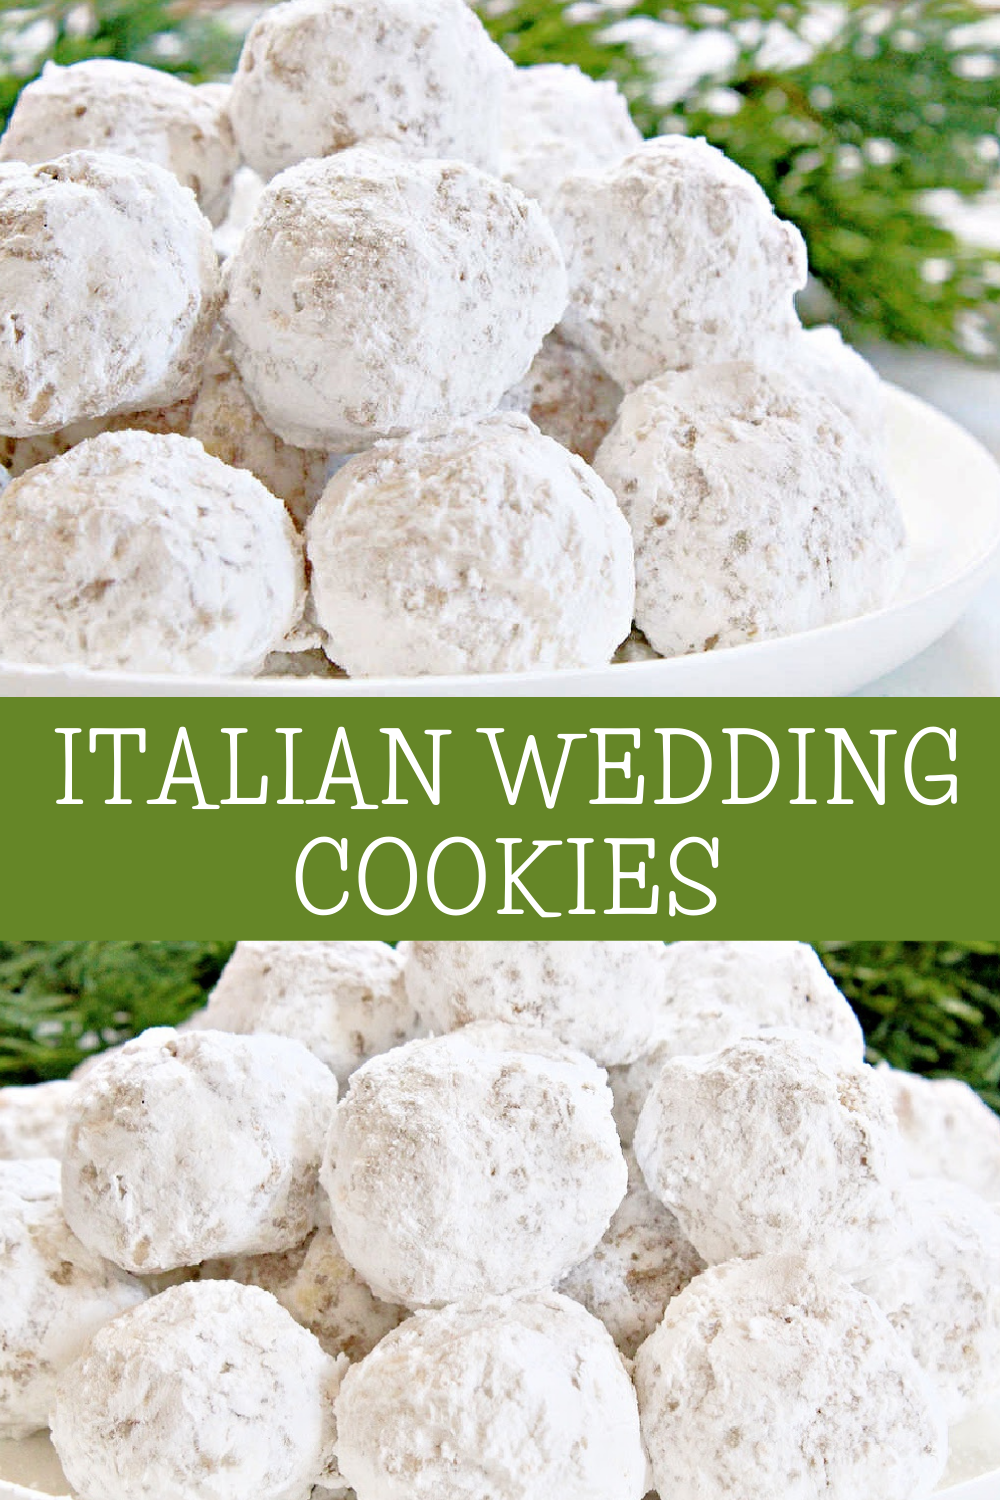 Italian Wedding Cookies ~ These delicate and nutty, dairy-free shortbread cookies rolled in powdered sugar pair especially well with coffee or hot tea! via @thiswifecooks